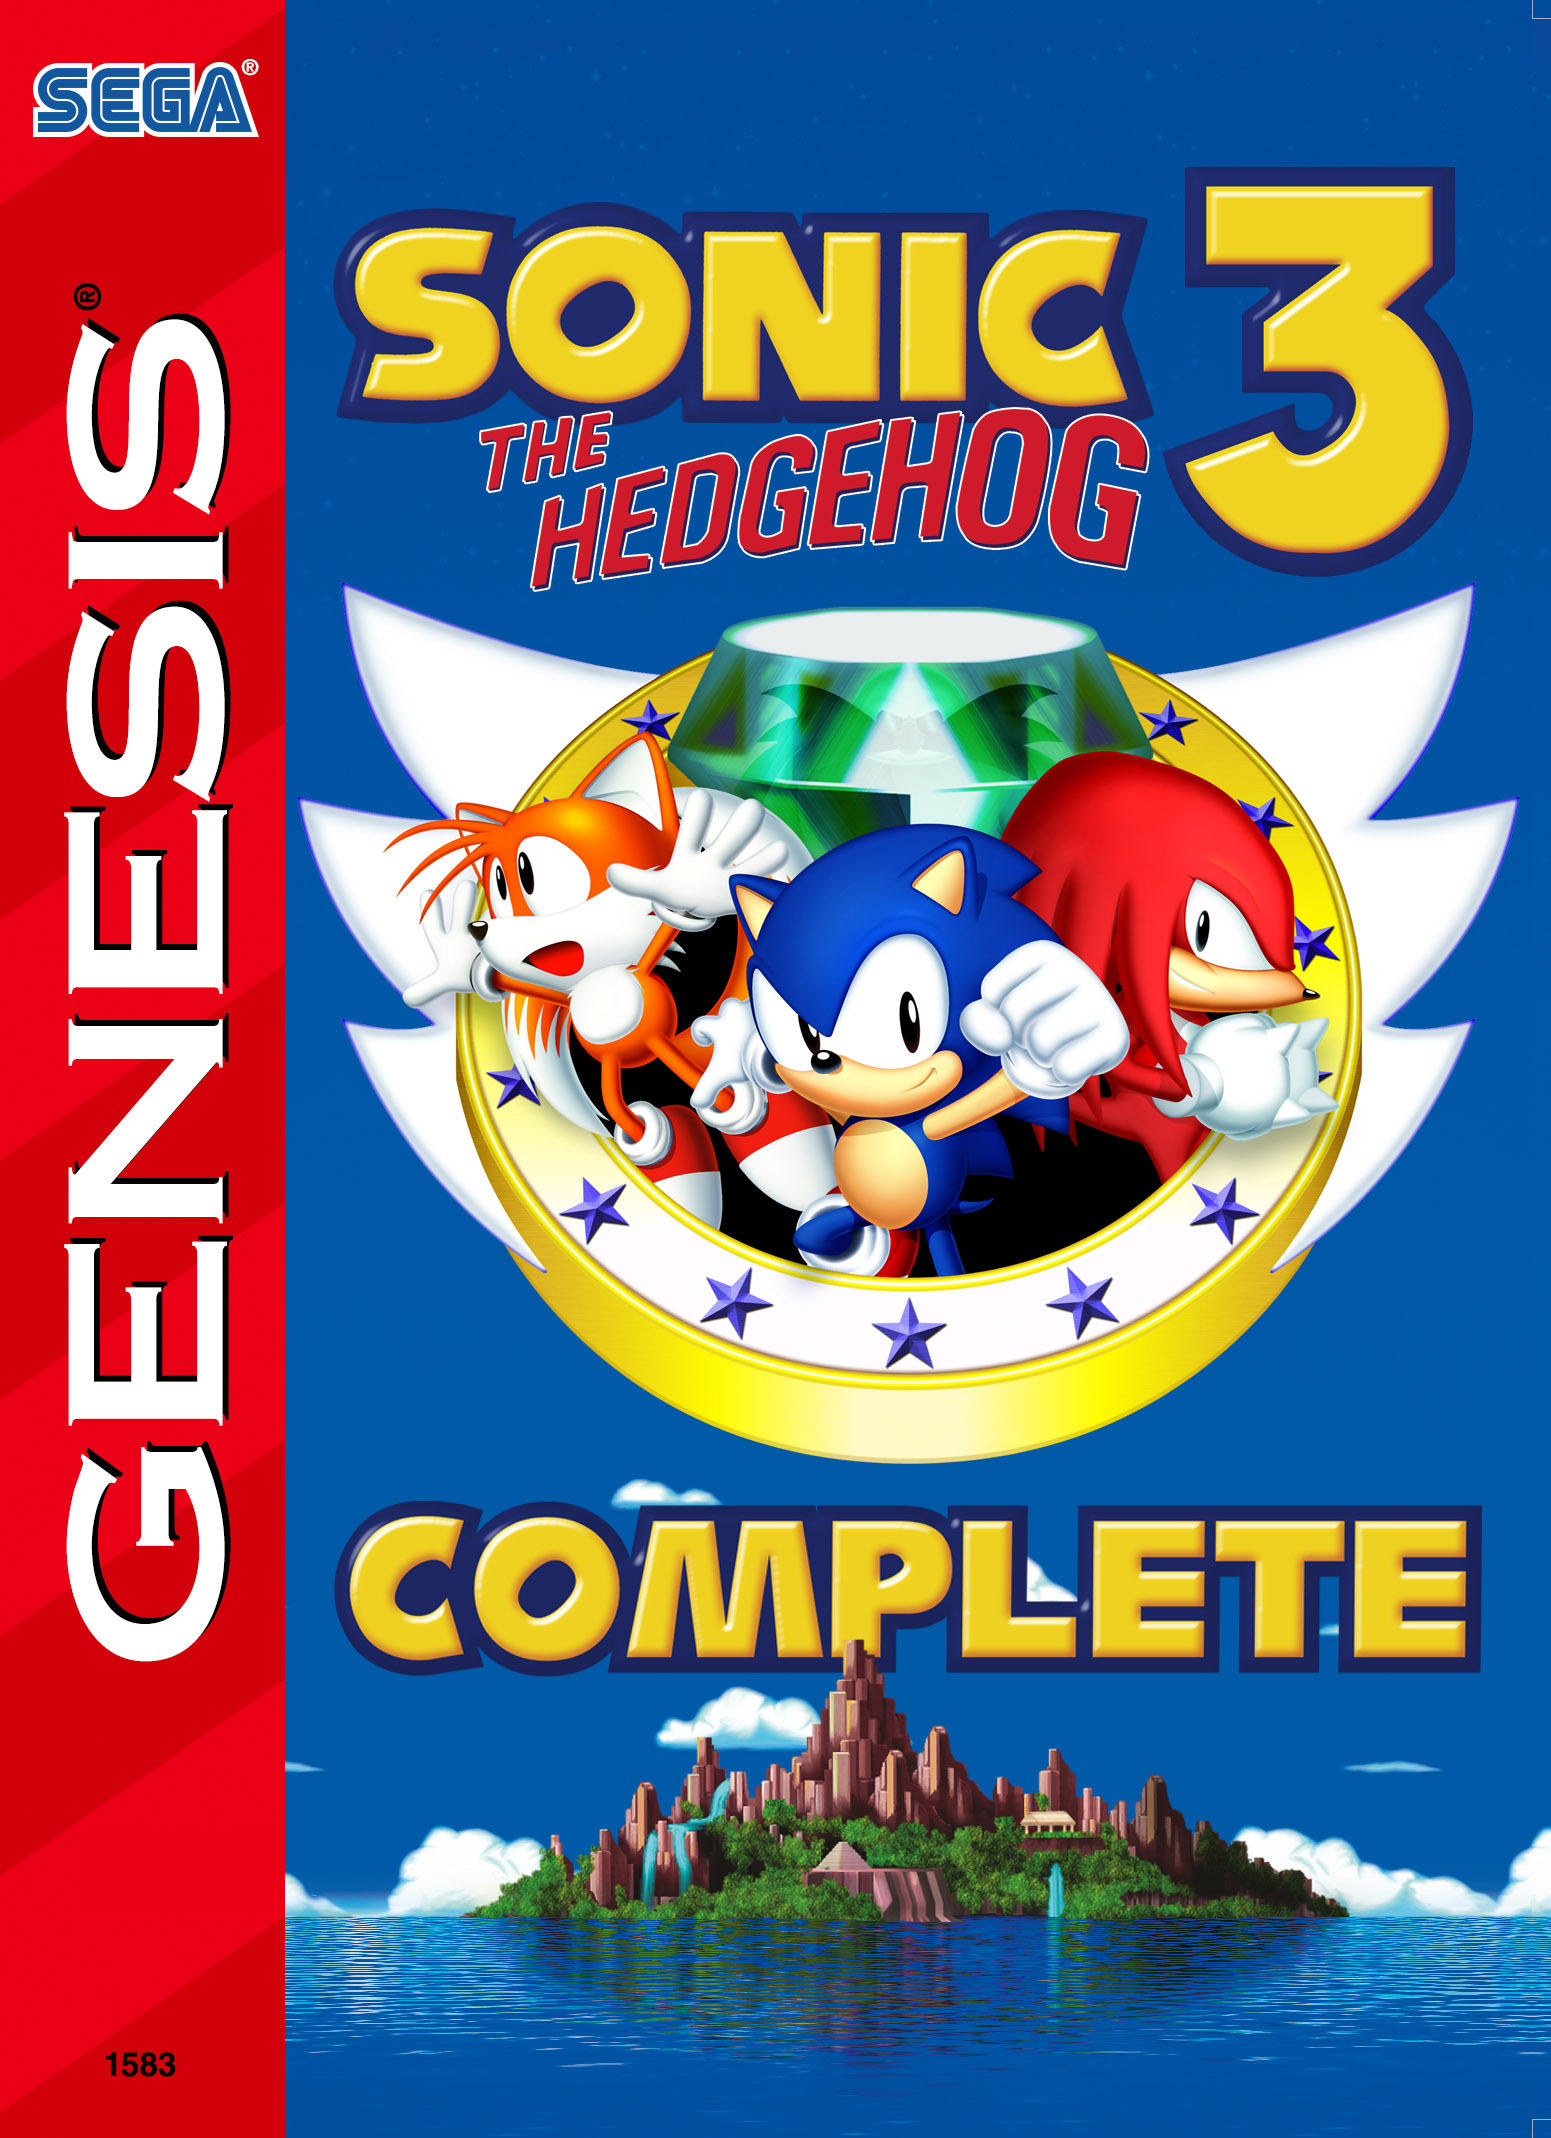 sonic-3-complete-details-launchbox-games-database